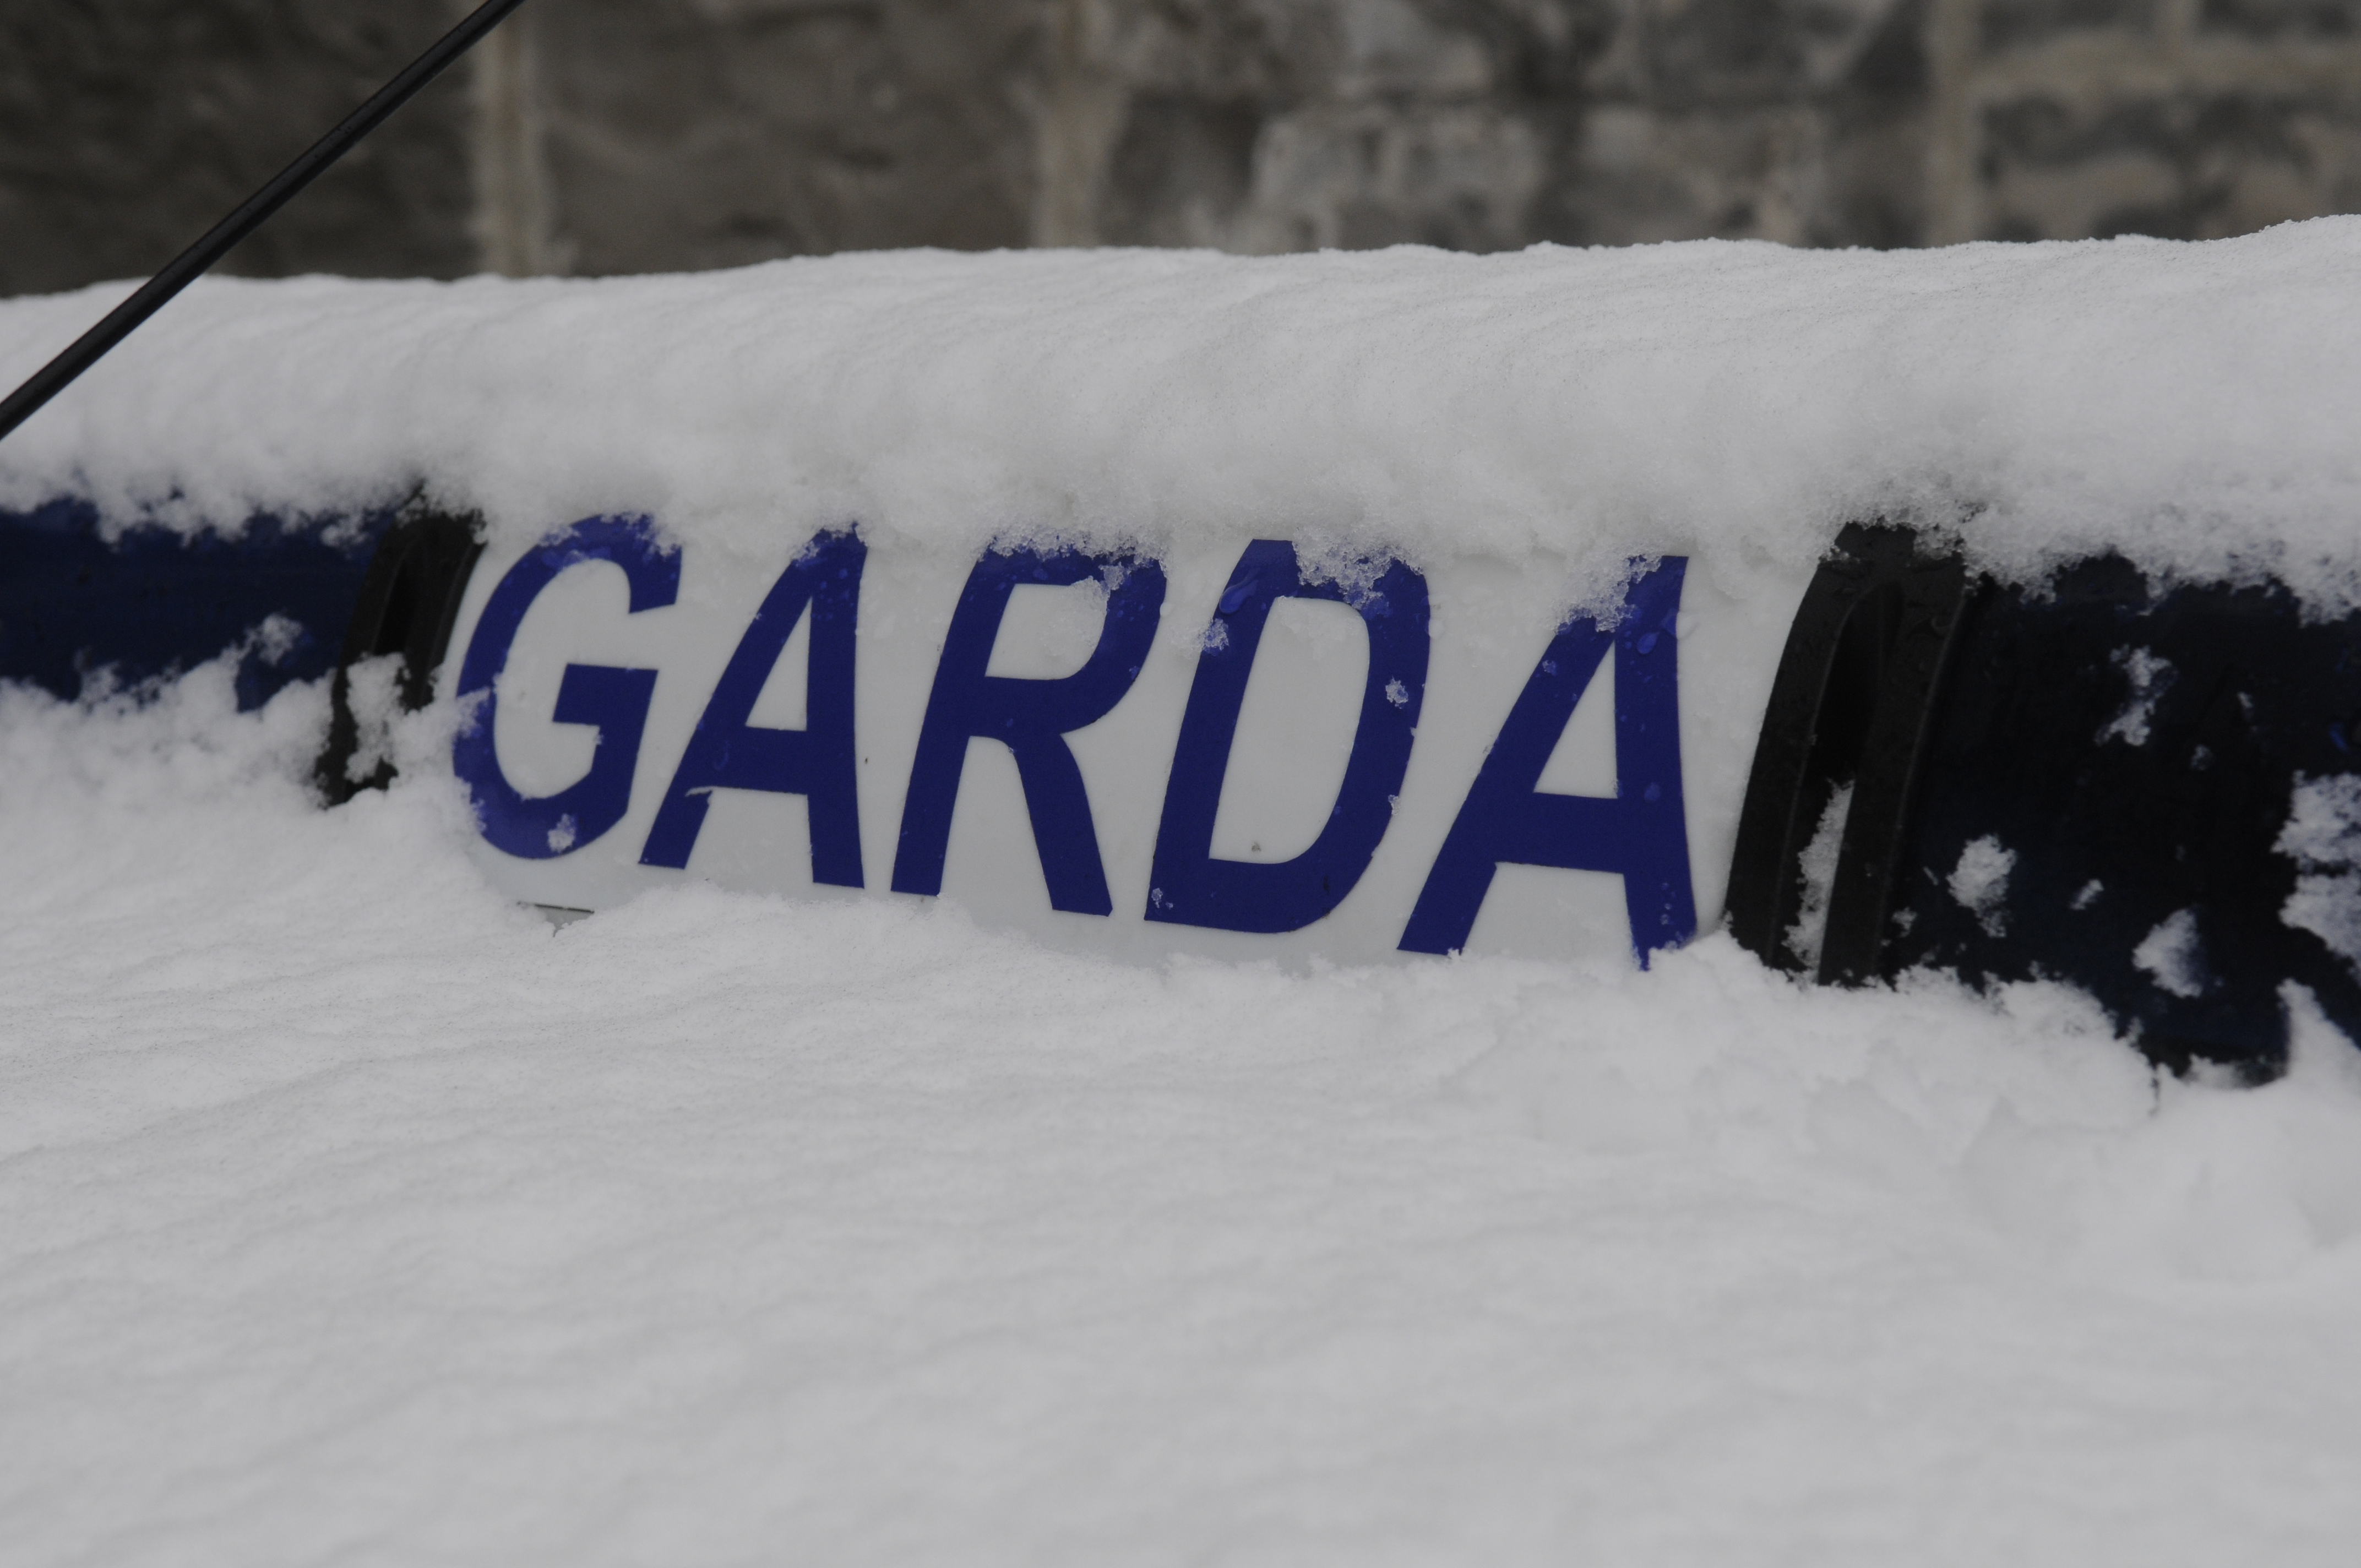 /garda/en/about-us/our-departments/office-of-corporate-communications/news-media/garda-roof-light-in-snow.JPG